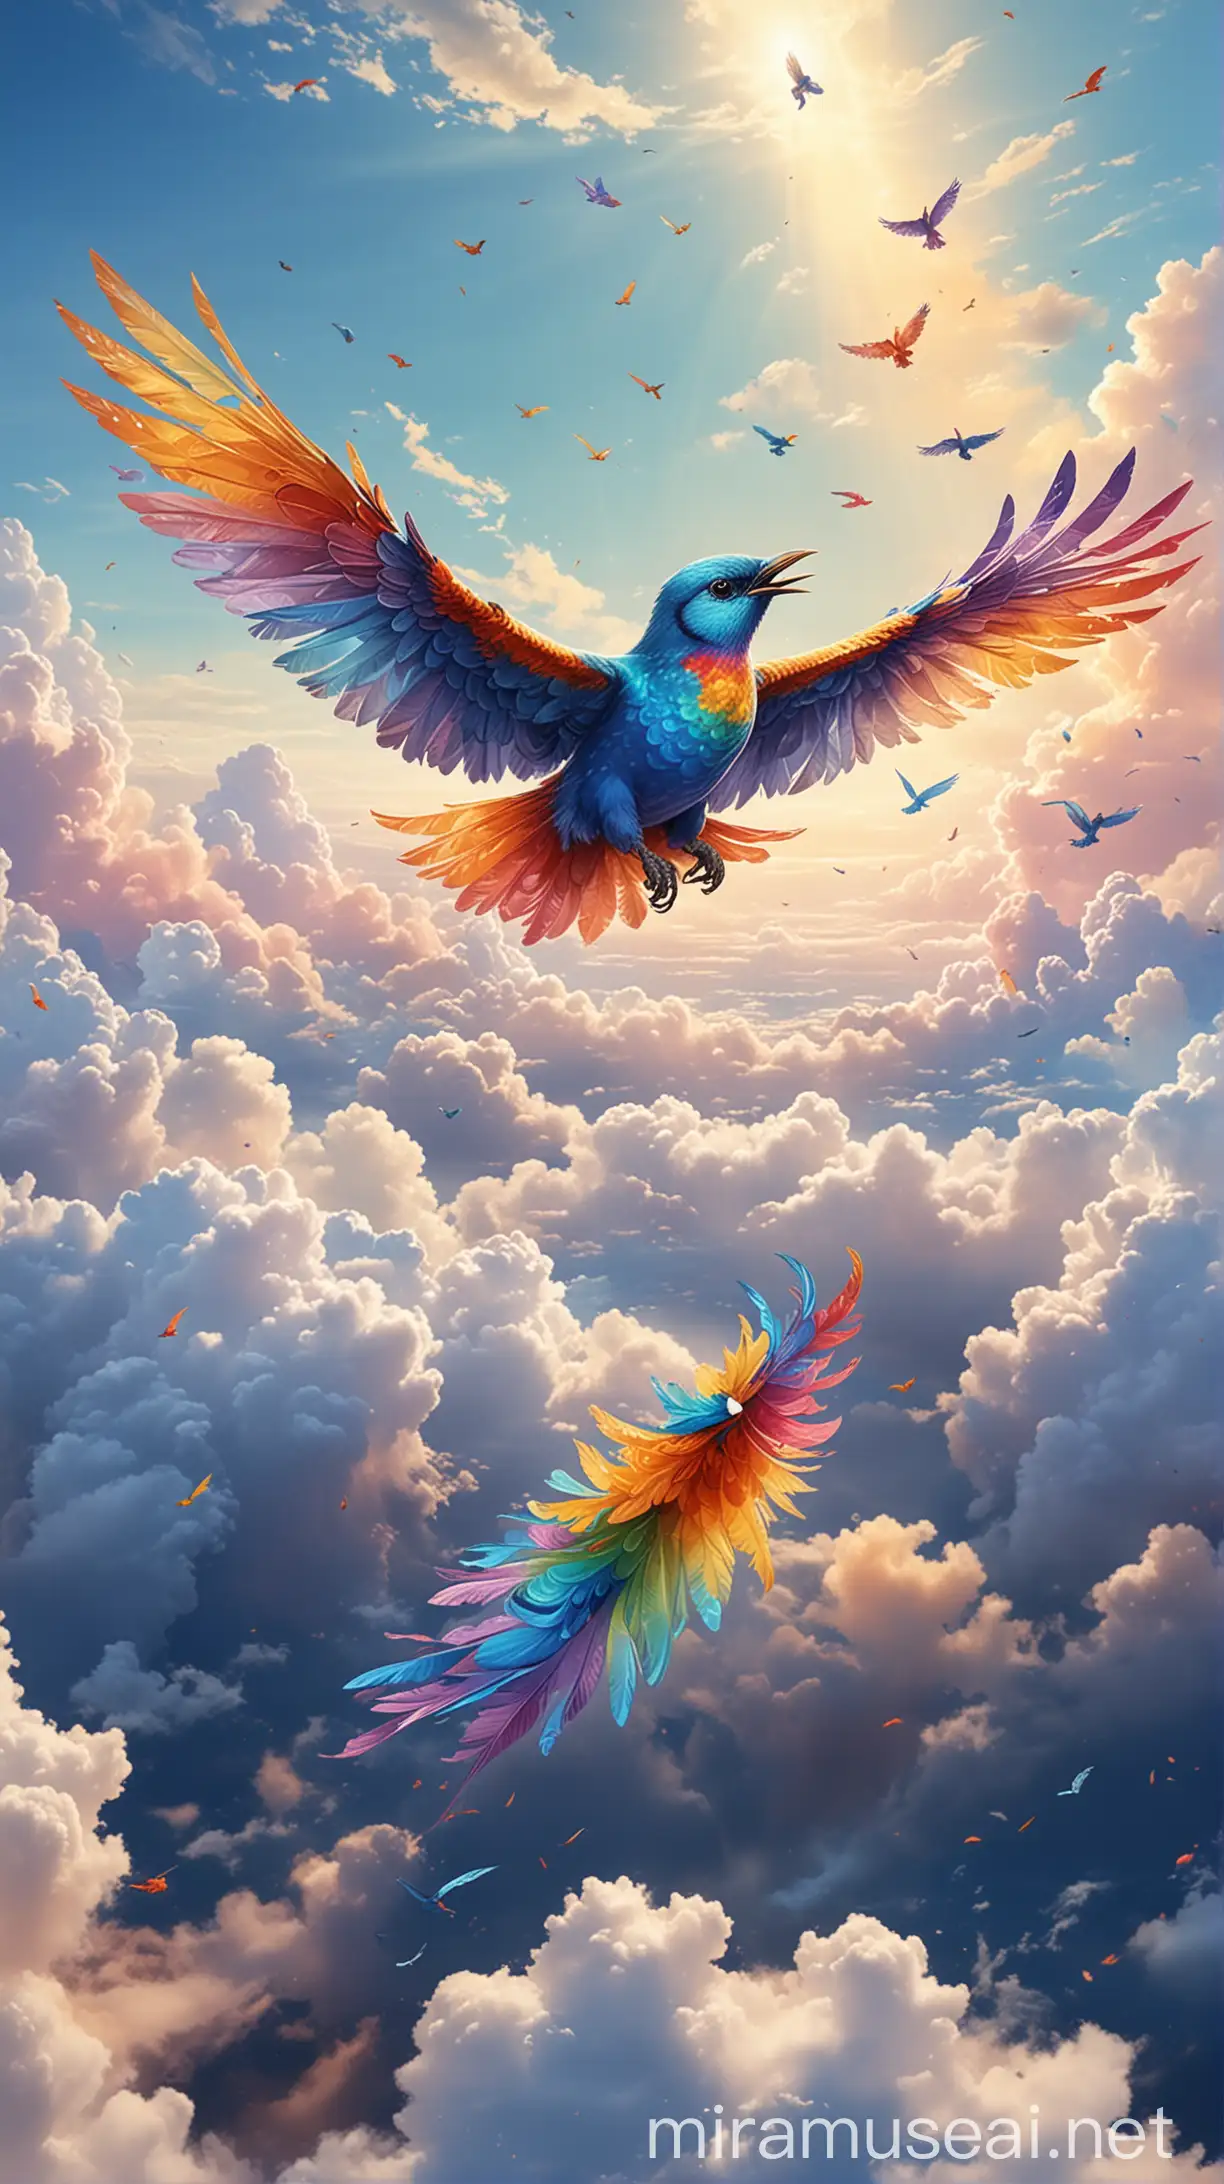 Vibrant Bird Soaring with Joy in the Boundless Sky